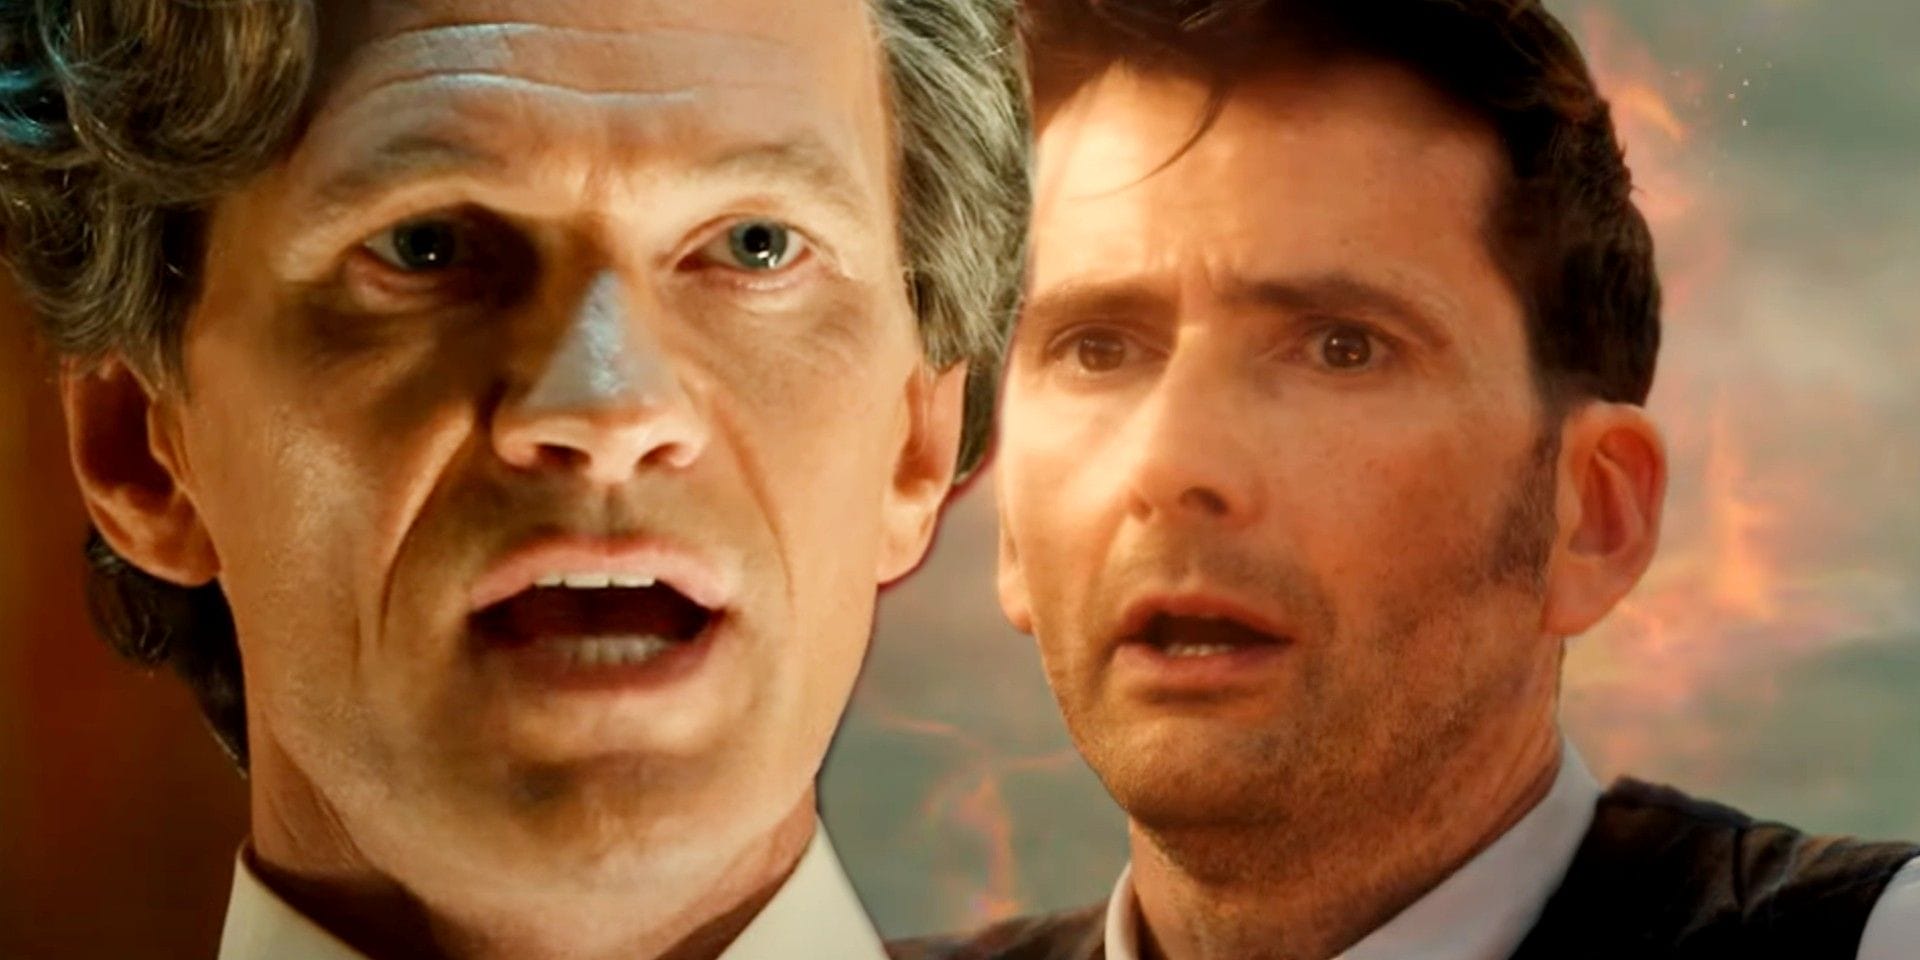 Doctor Who "The Giggle" Trailer: Toymaker Is Back & Regeneration Between Tennant & Gatwa Teased In Final Episode